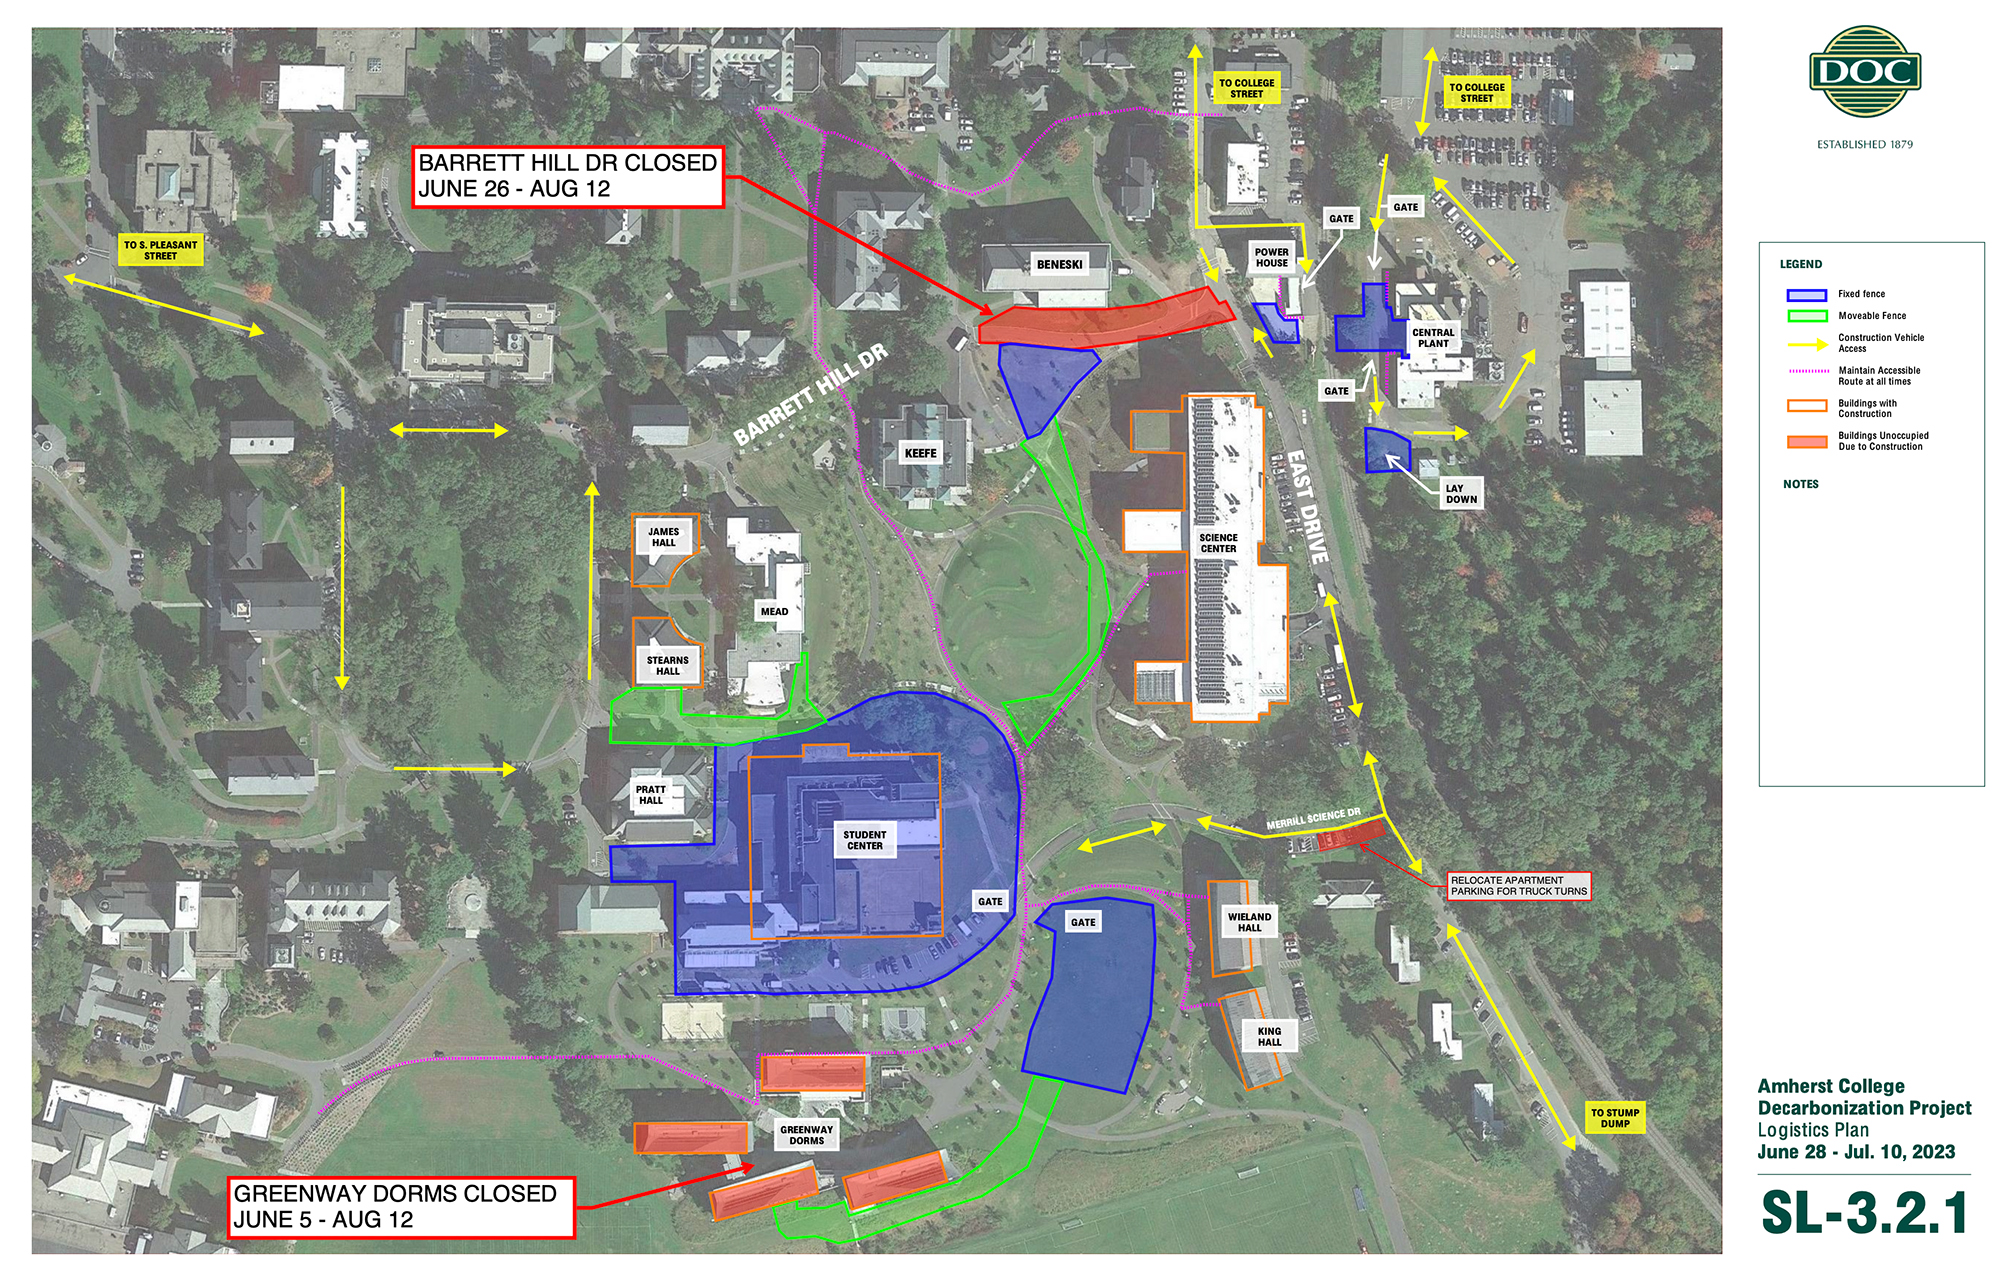 A construction map of campus showing areas of work described in the accompanying text